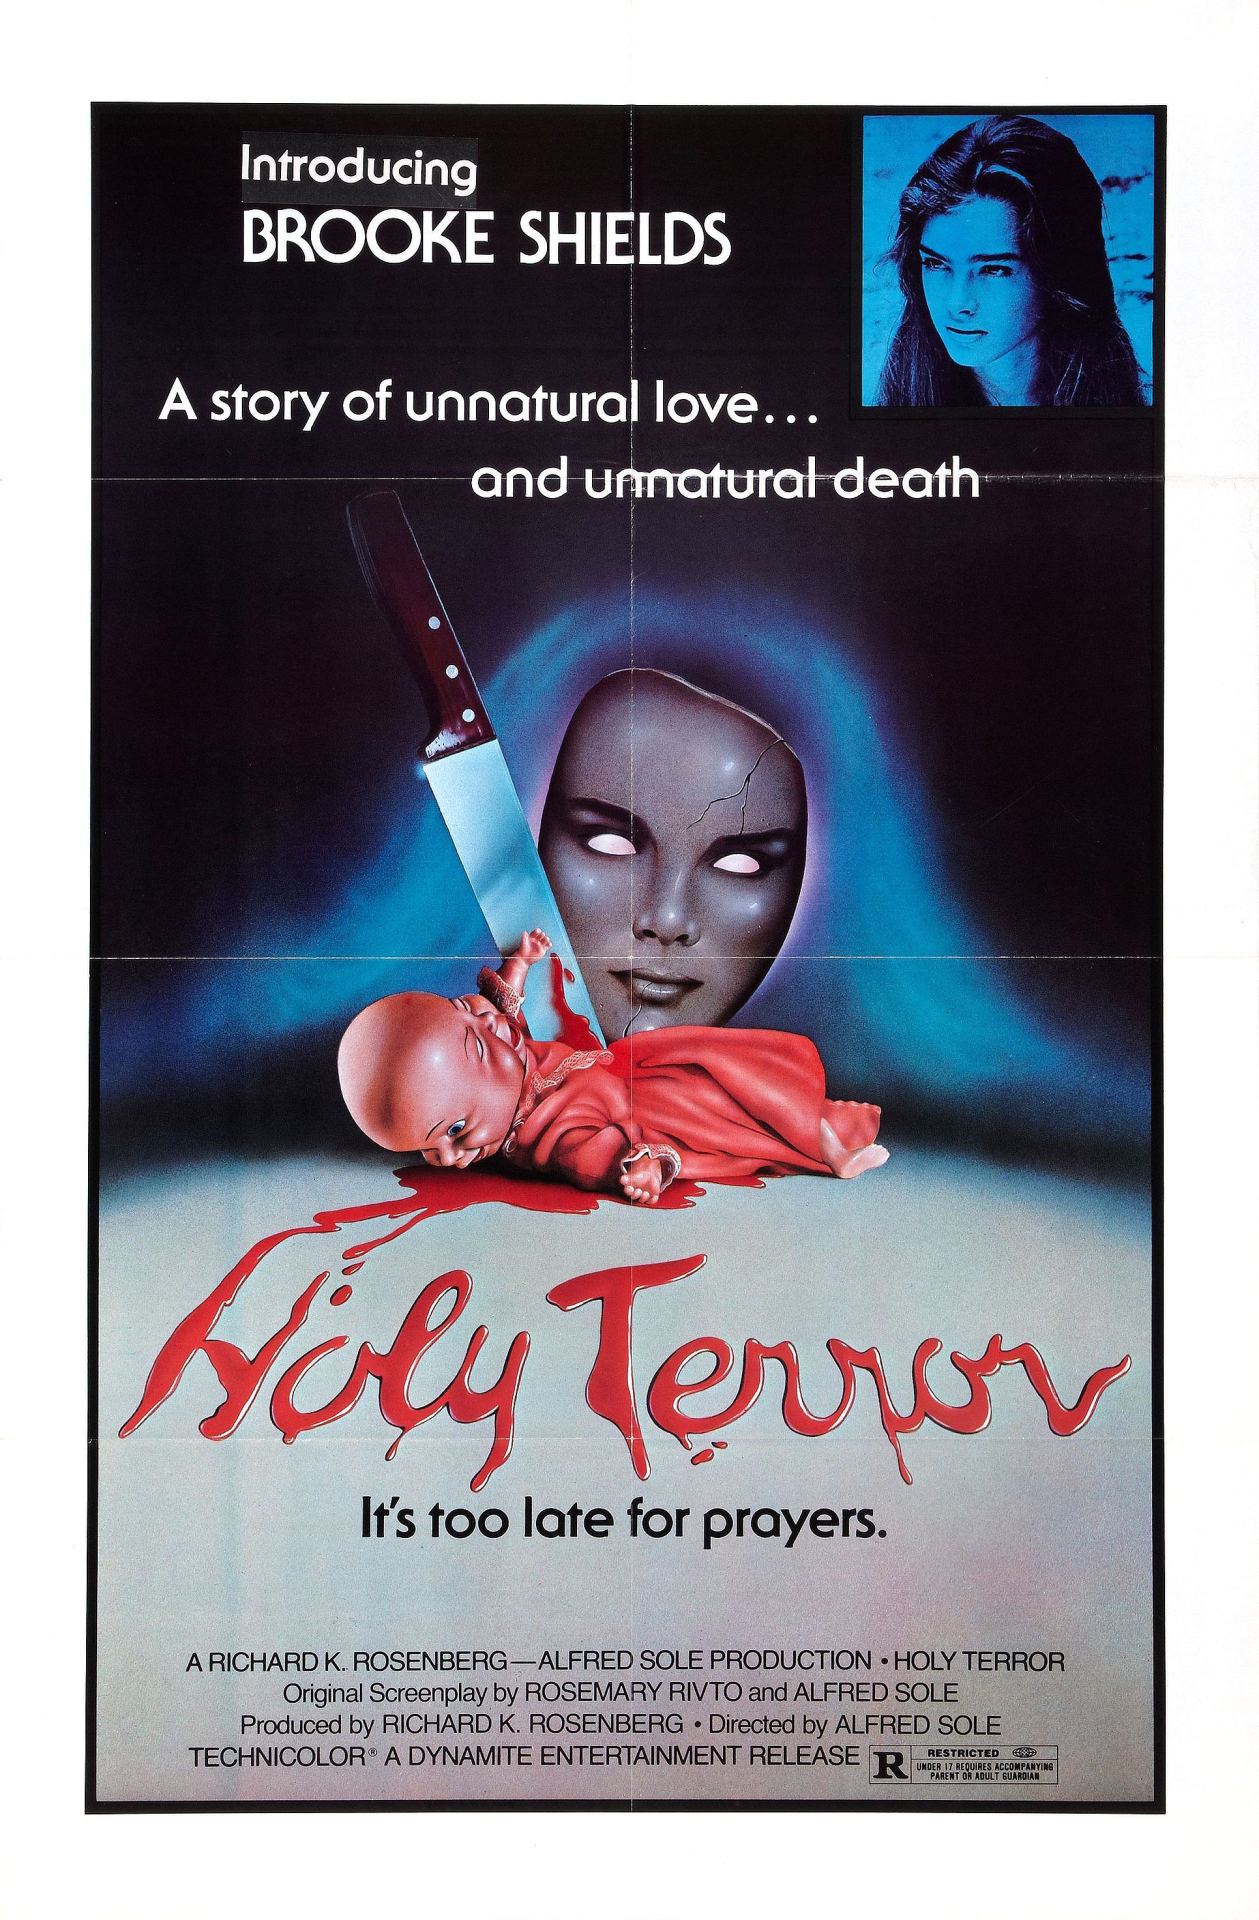 blogadas: Holy Terror (1976) lol this poster is so misleading, brooke sheids is only in like the first two scenes of the movie and she is a lot younger than in that picture. Also a story of unnatural love&#160;? maybe I missed something but I&#8217;m sure that isn&#8217;t what the films about. All that aside this is actually a cool movie 